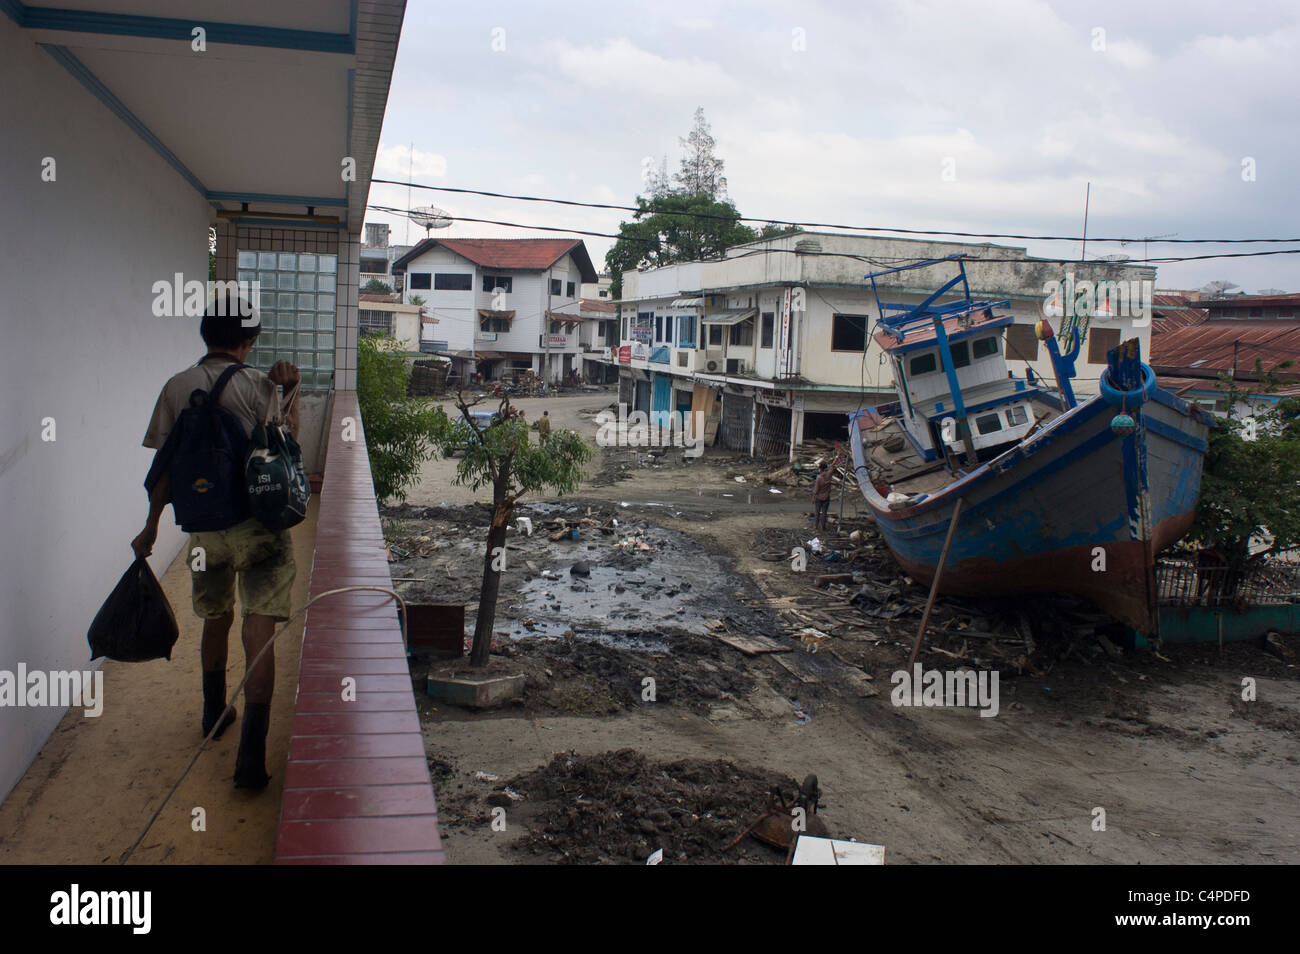 A view of the destruction caused by the earthquake and tsunami in Banda Aceh, Indonesia Stock Photo